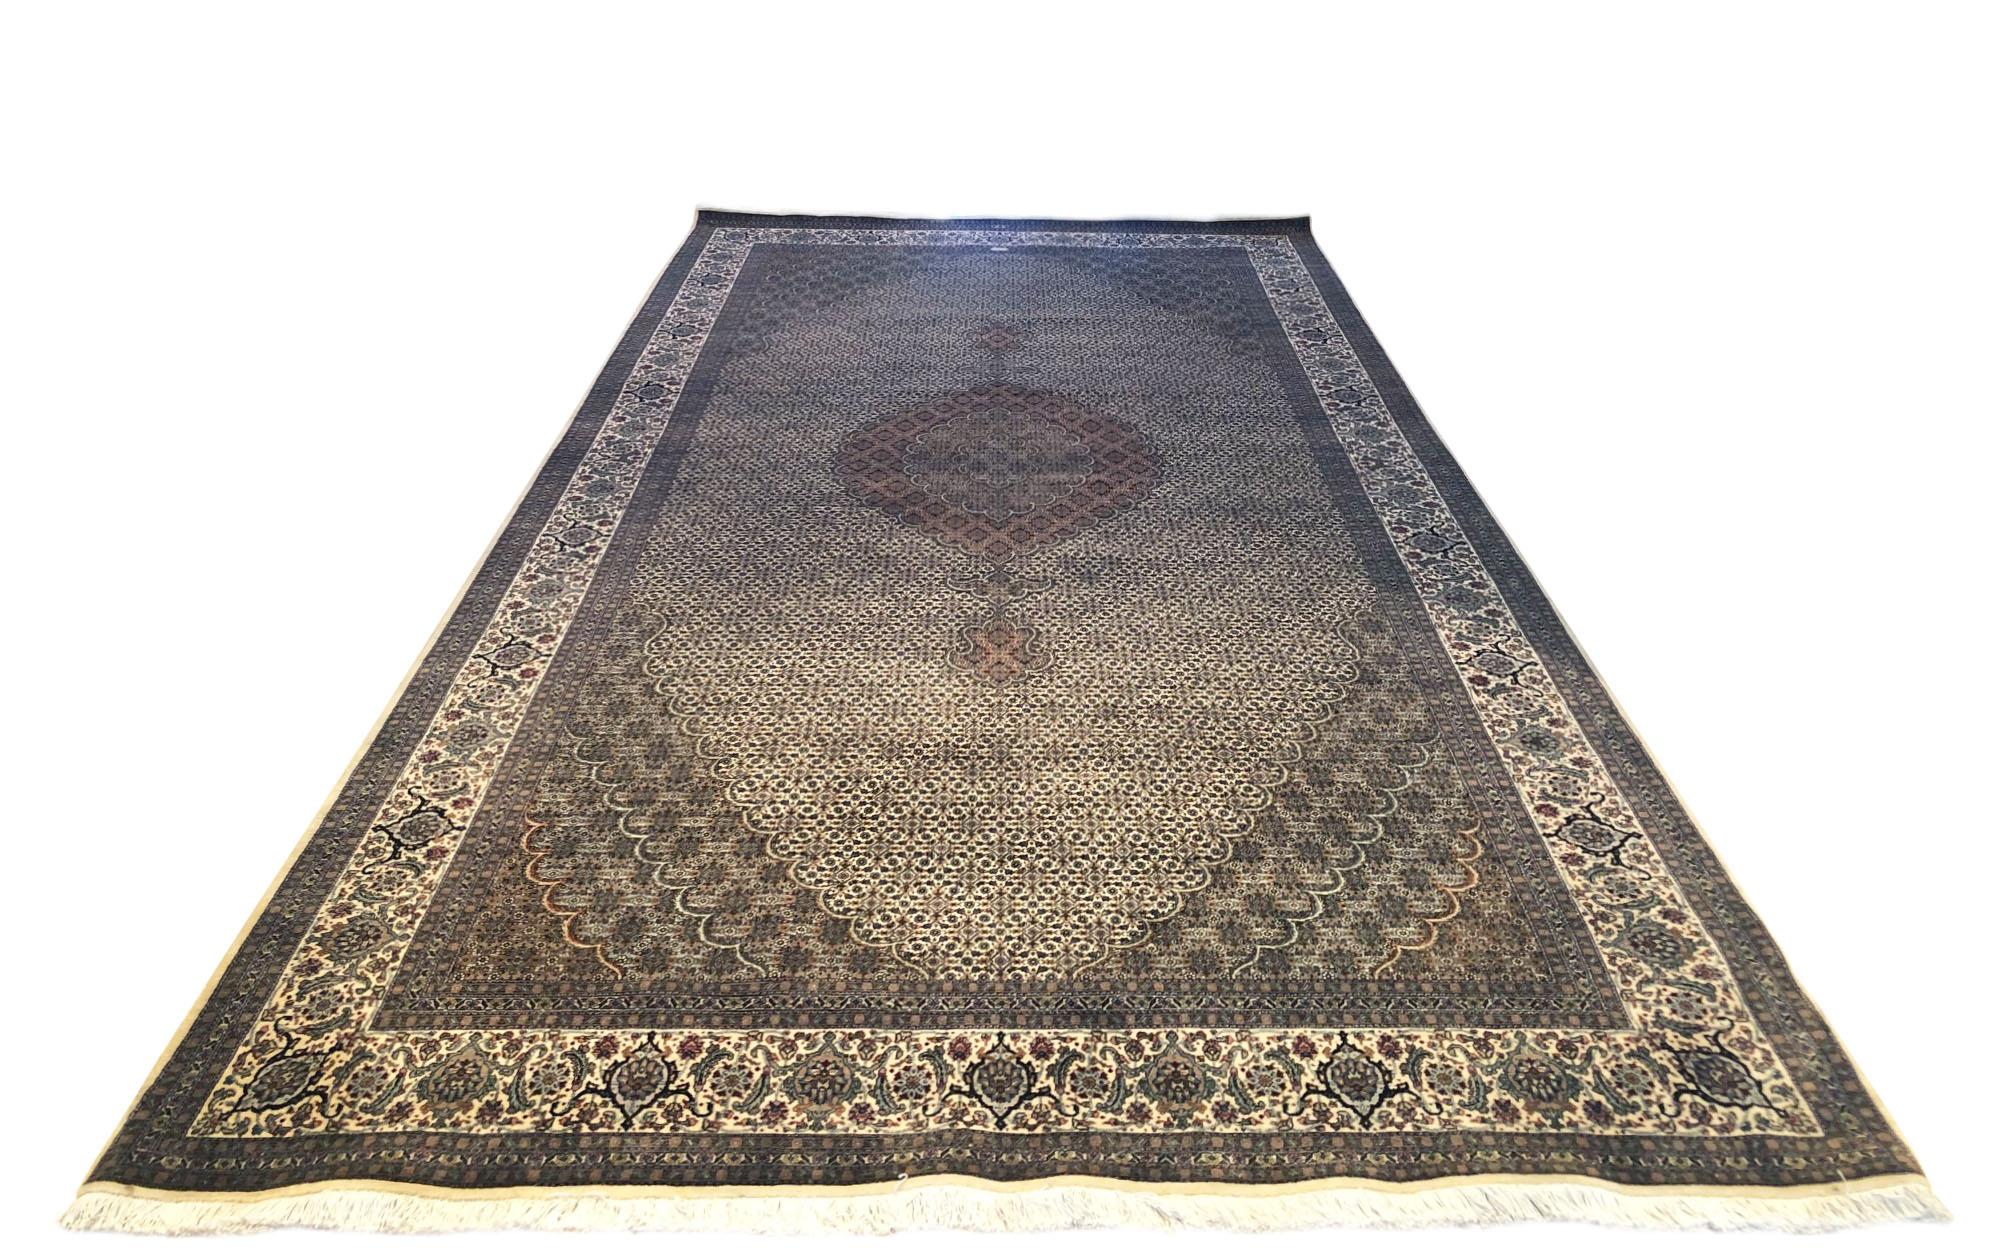 Tabriz rugs are well known for their excellent weaving and design. One of the very famous patterns of Tabriz rugs are Fish Design known is Mahi. This beautiful piece has wool and silk pile with cotton foundation signed by Piroozian who is a